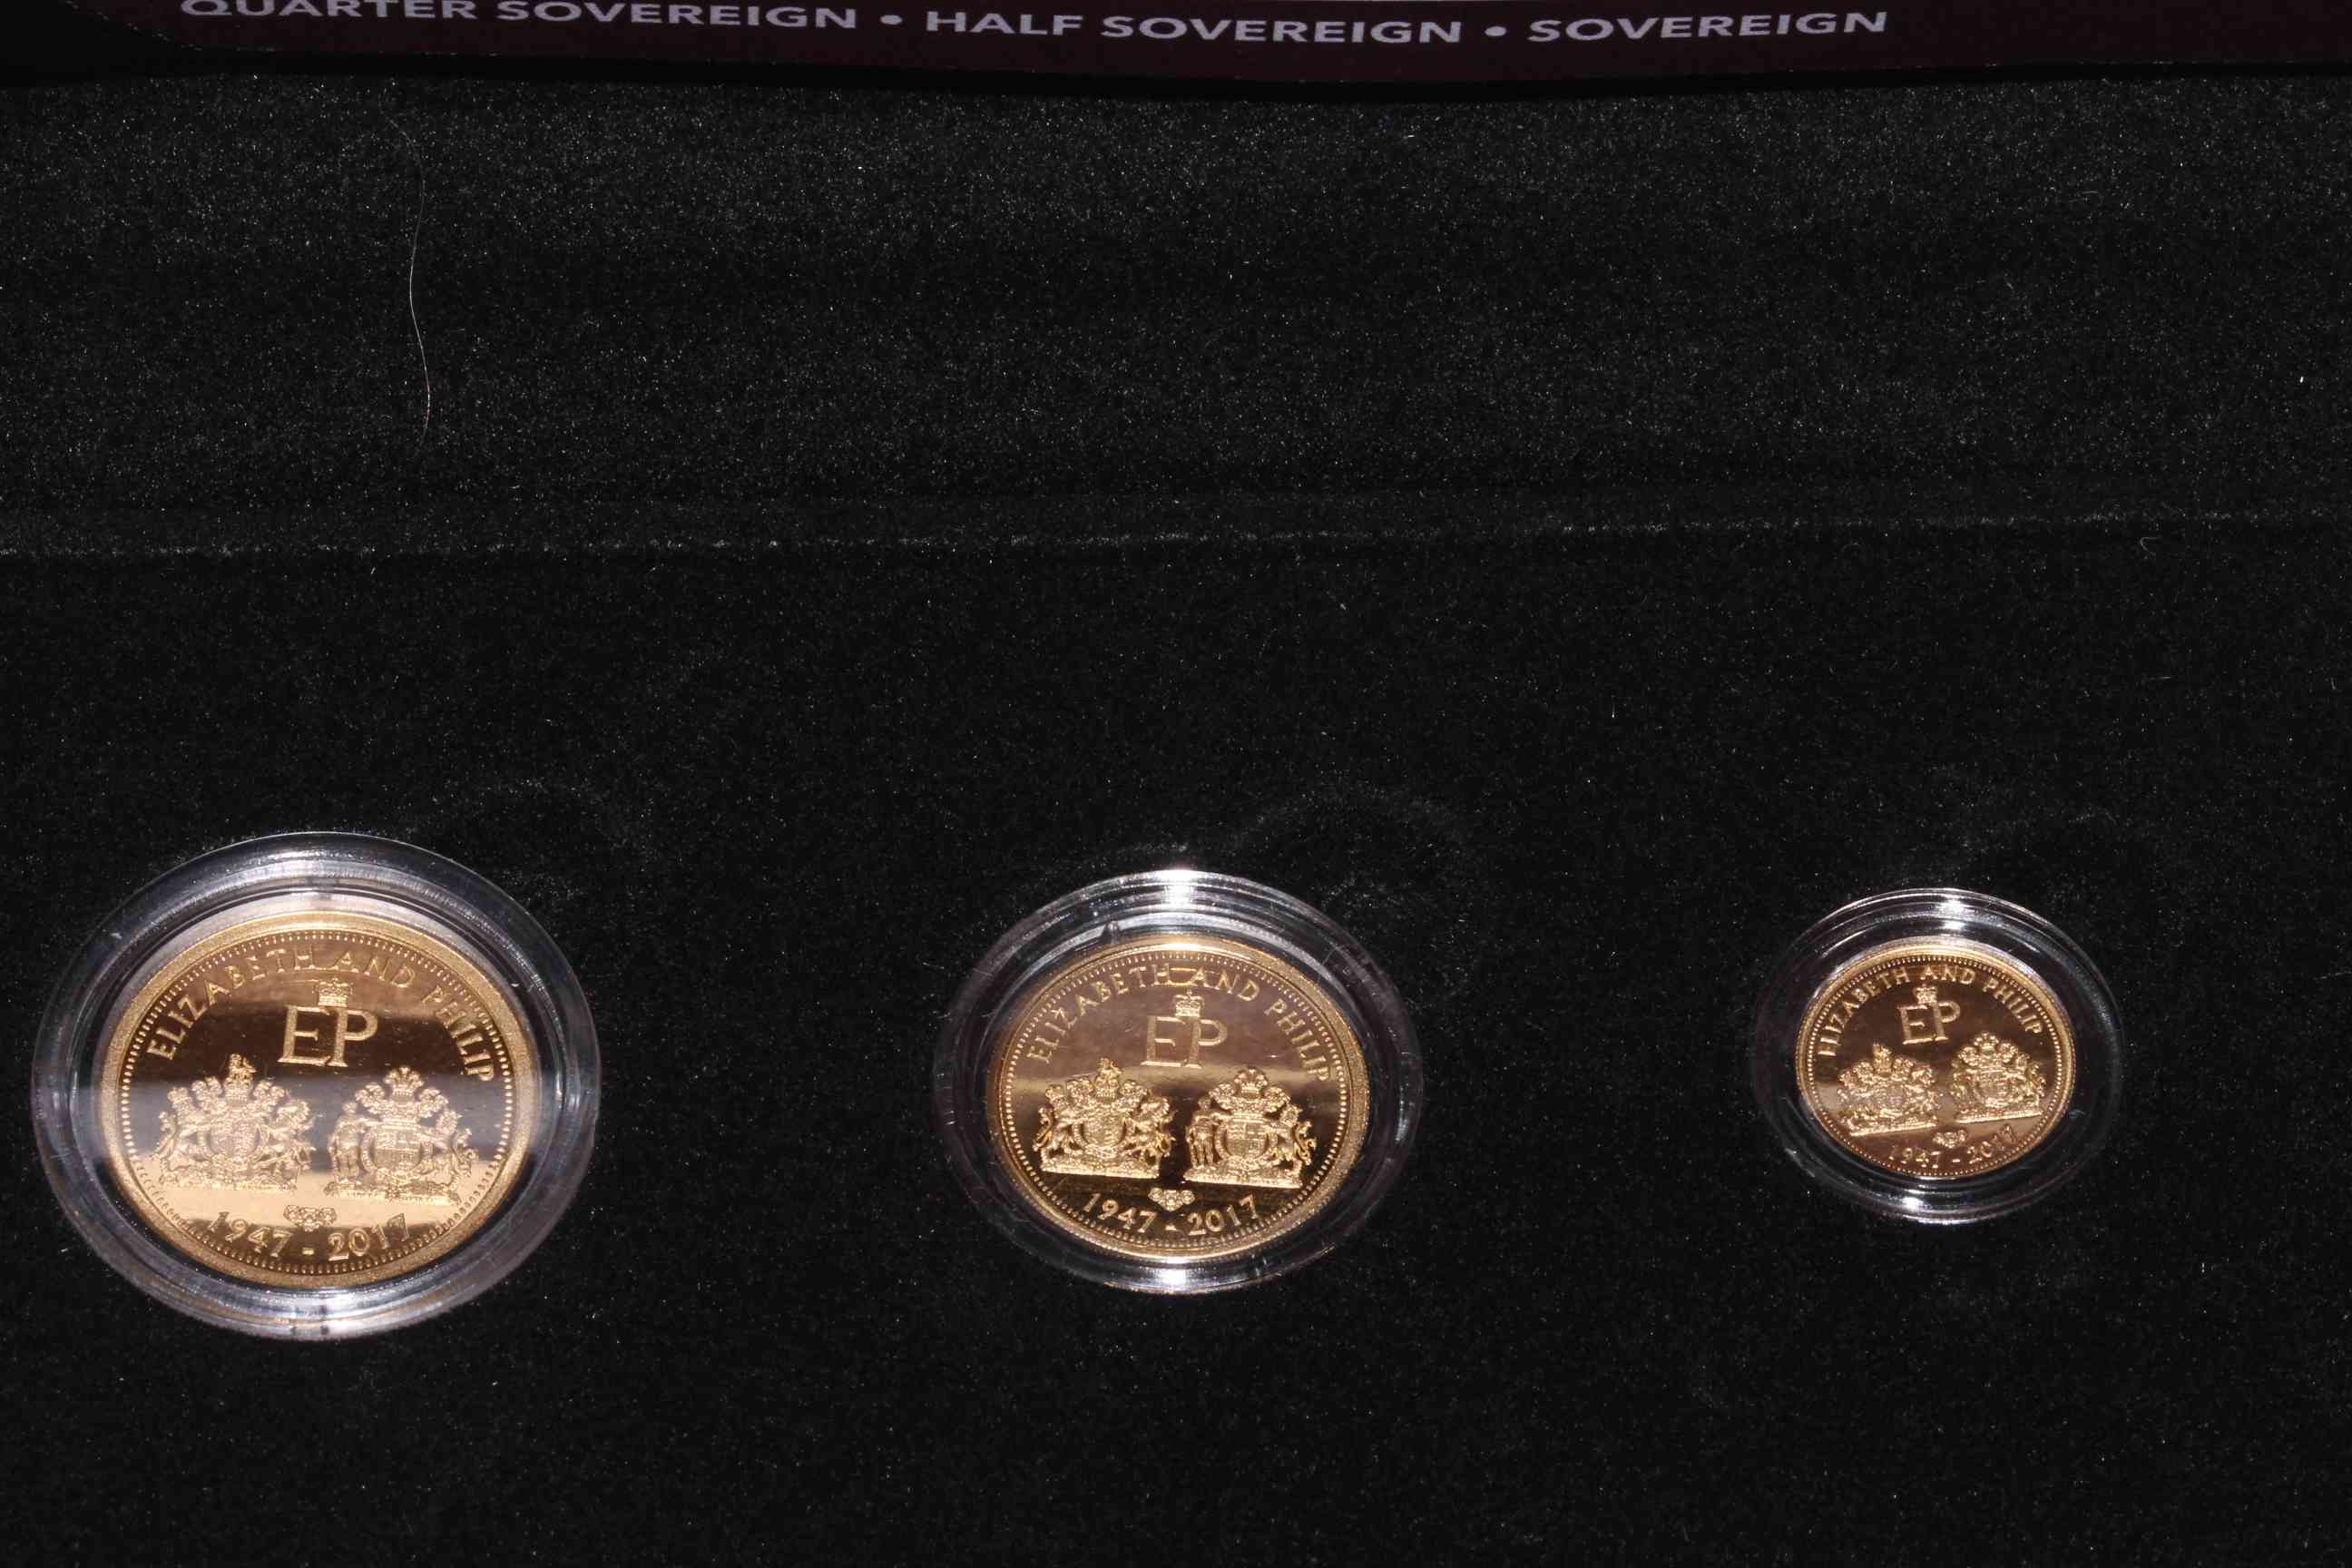 Double Portrait Gold Sovereign Series 2017, featuring a sovereign, half and quarter sovereigns,